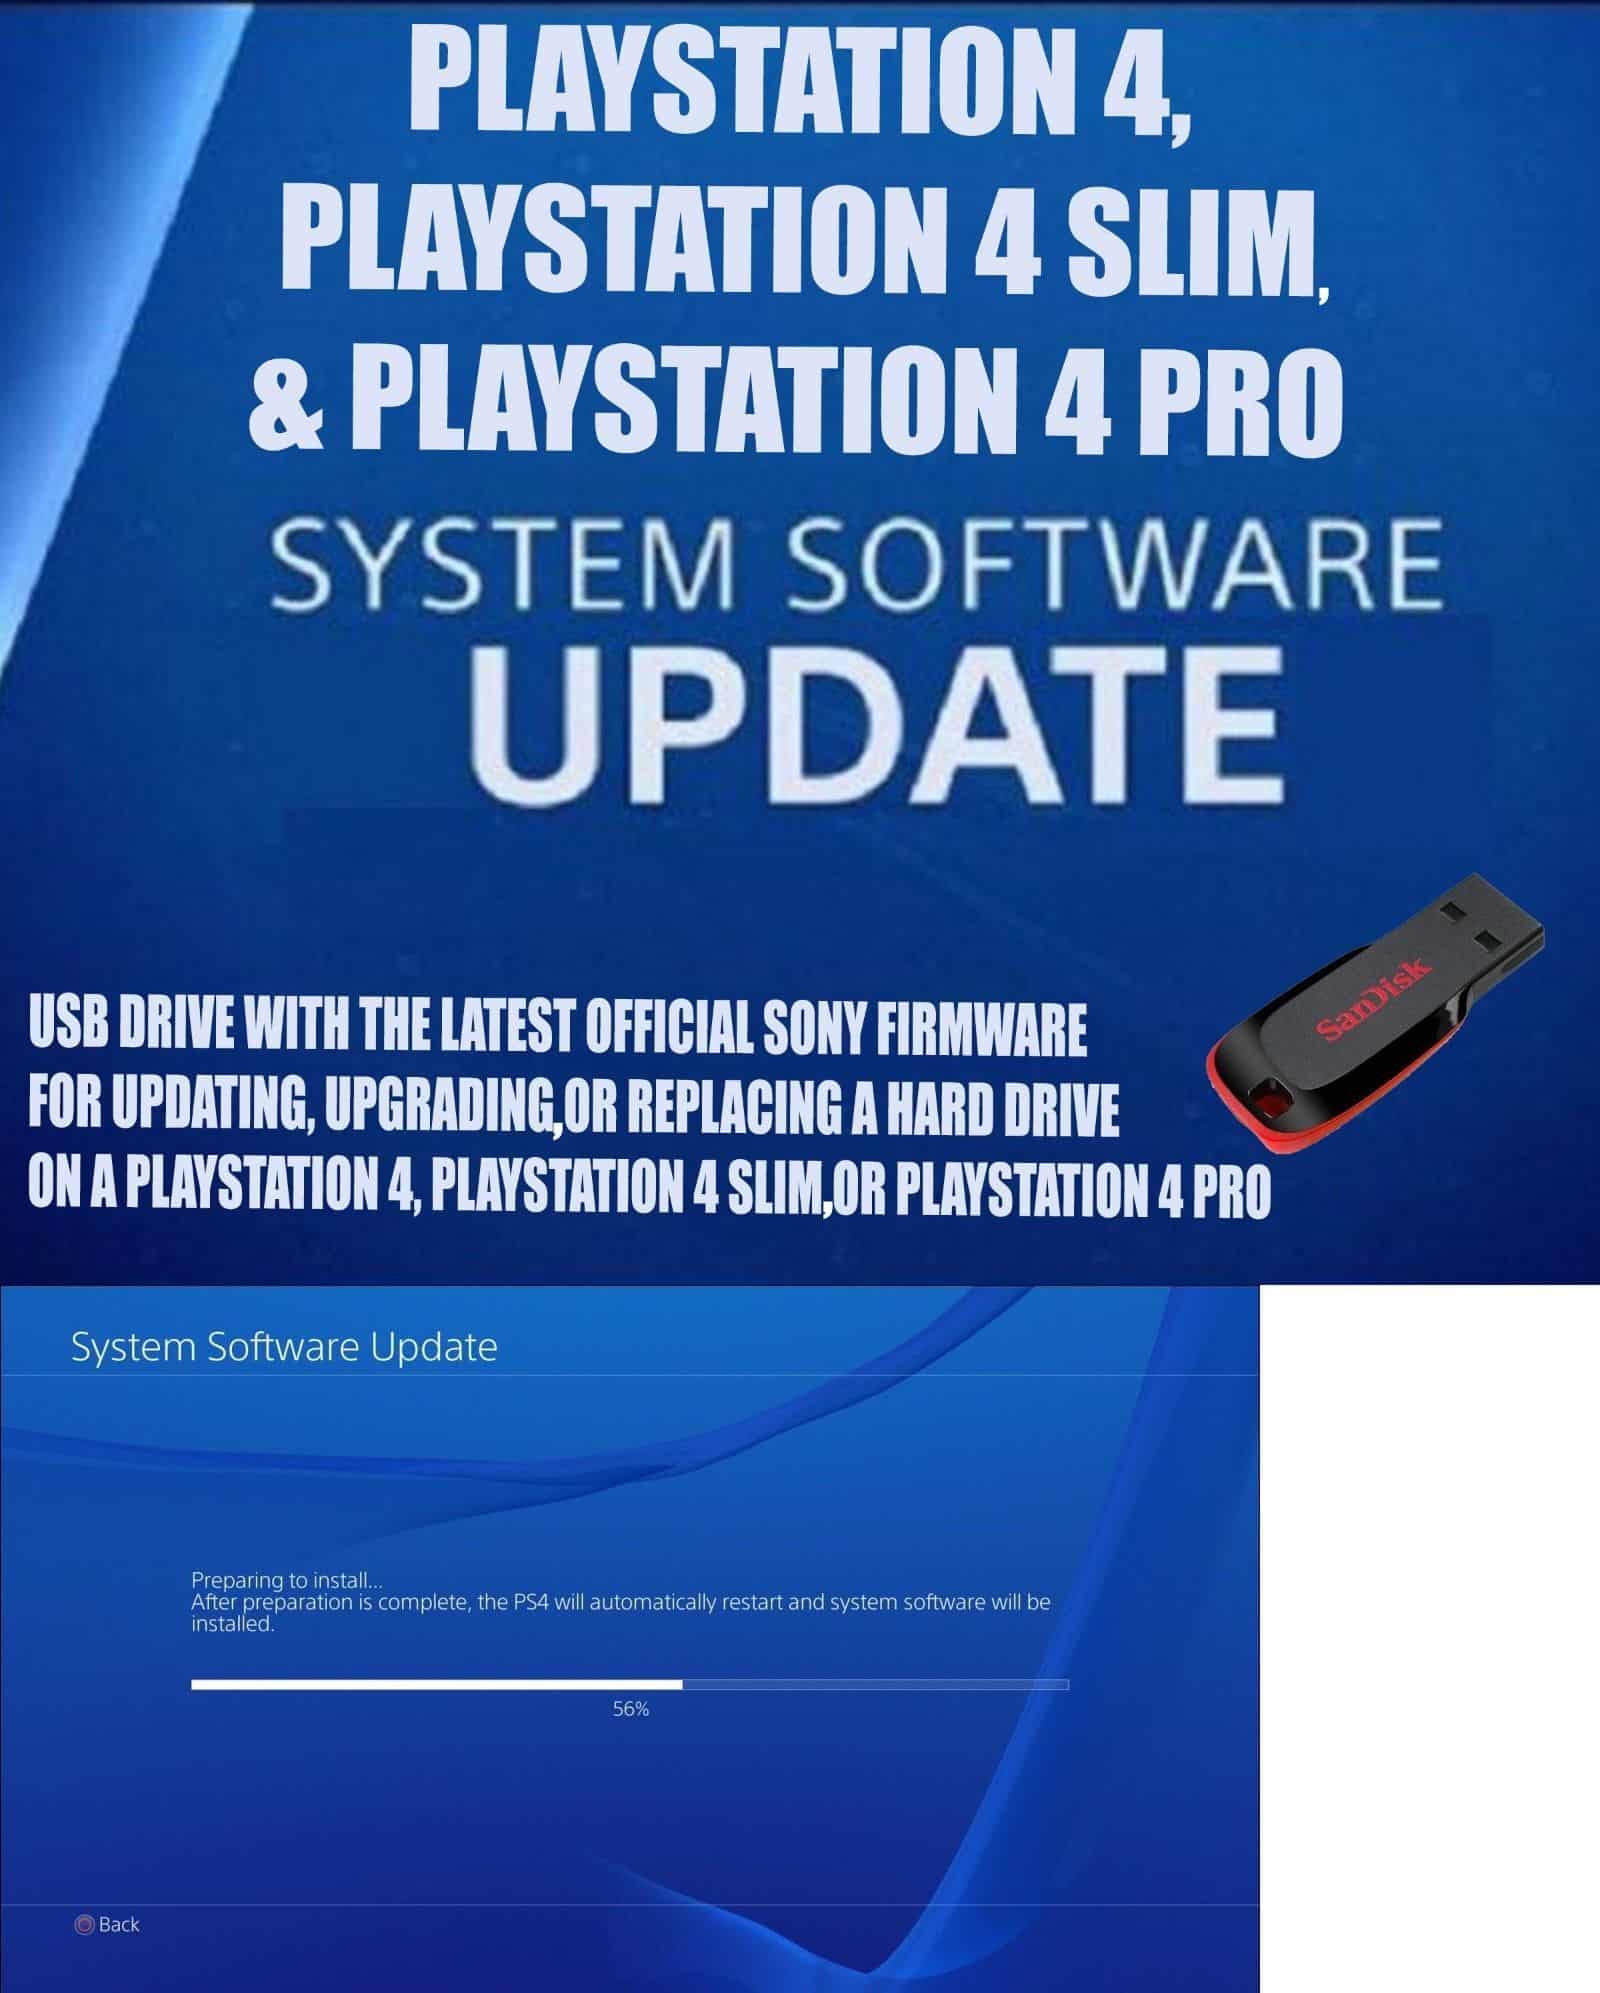 How To Install New Software On Ps4